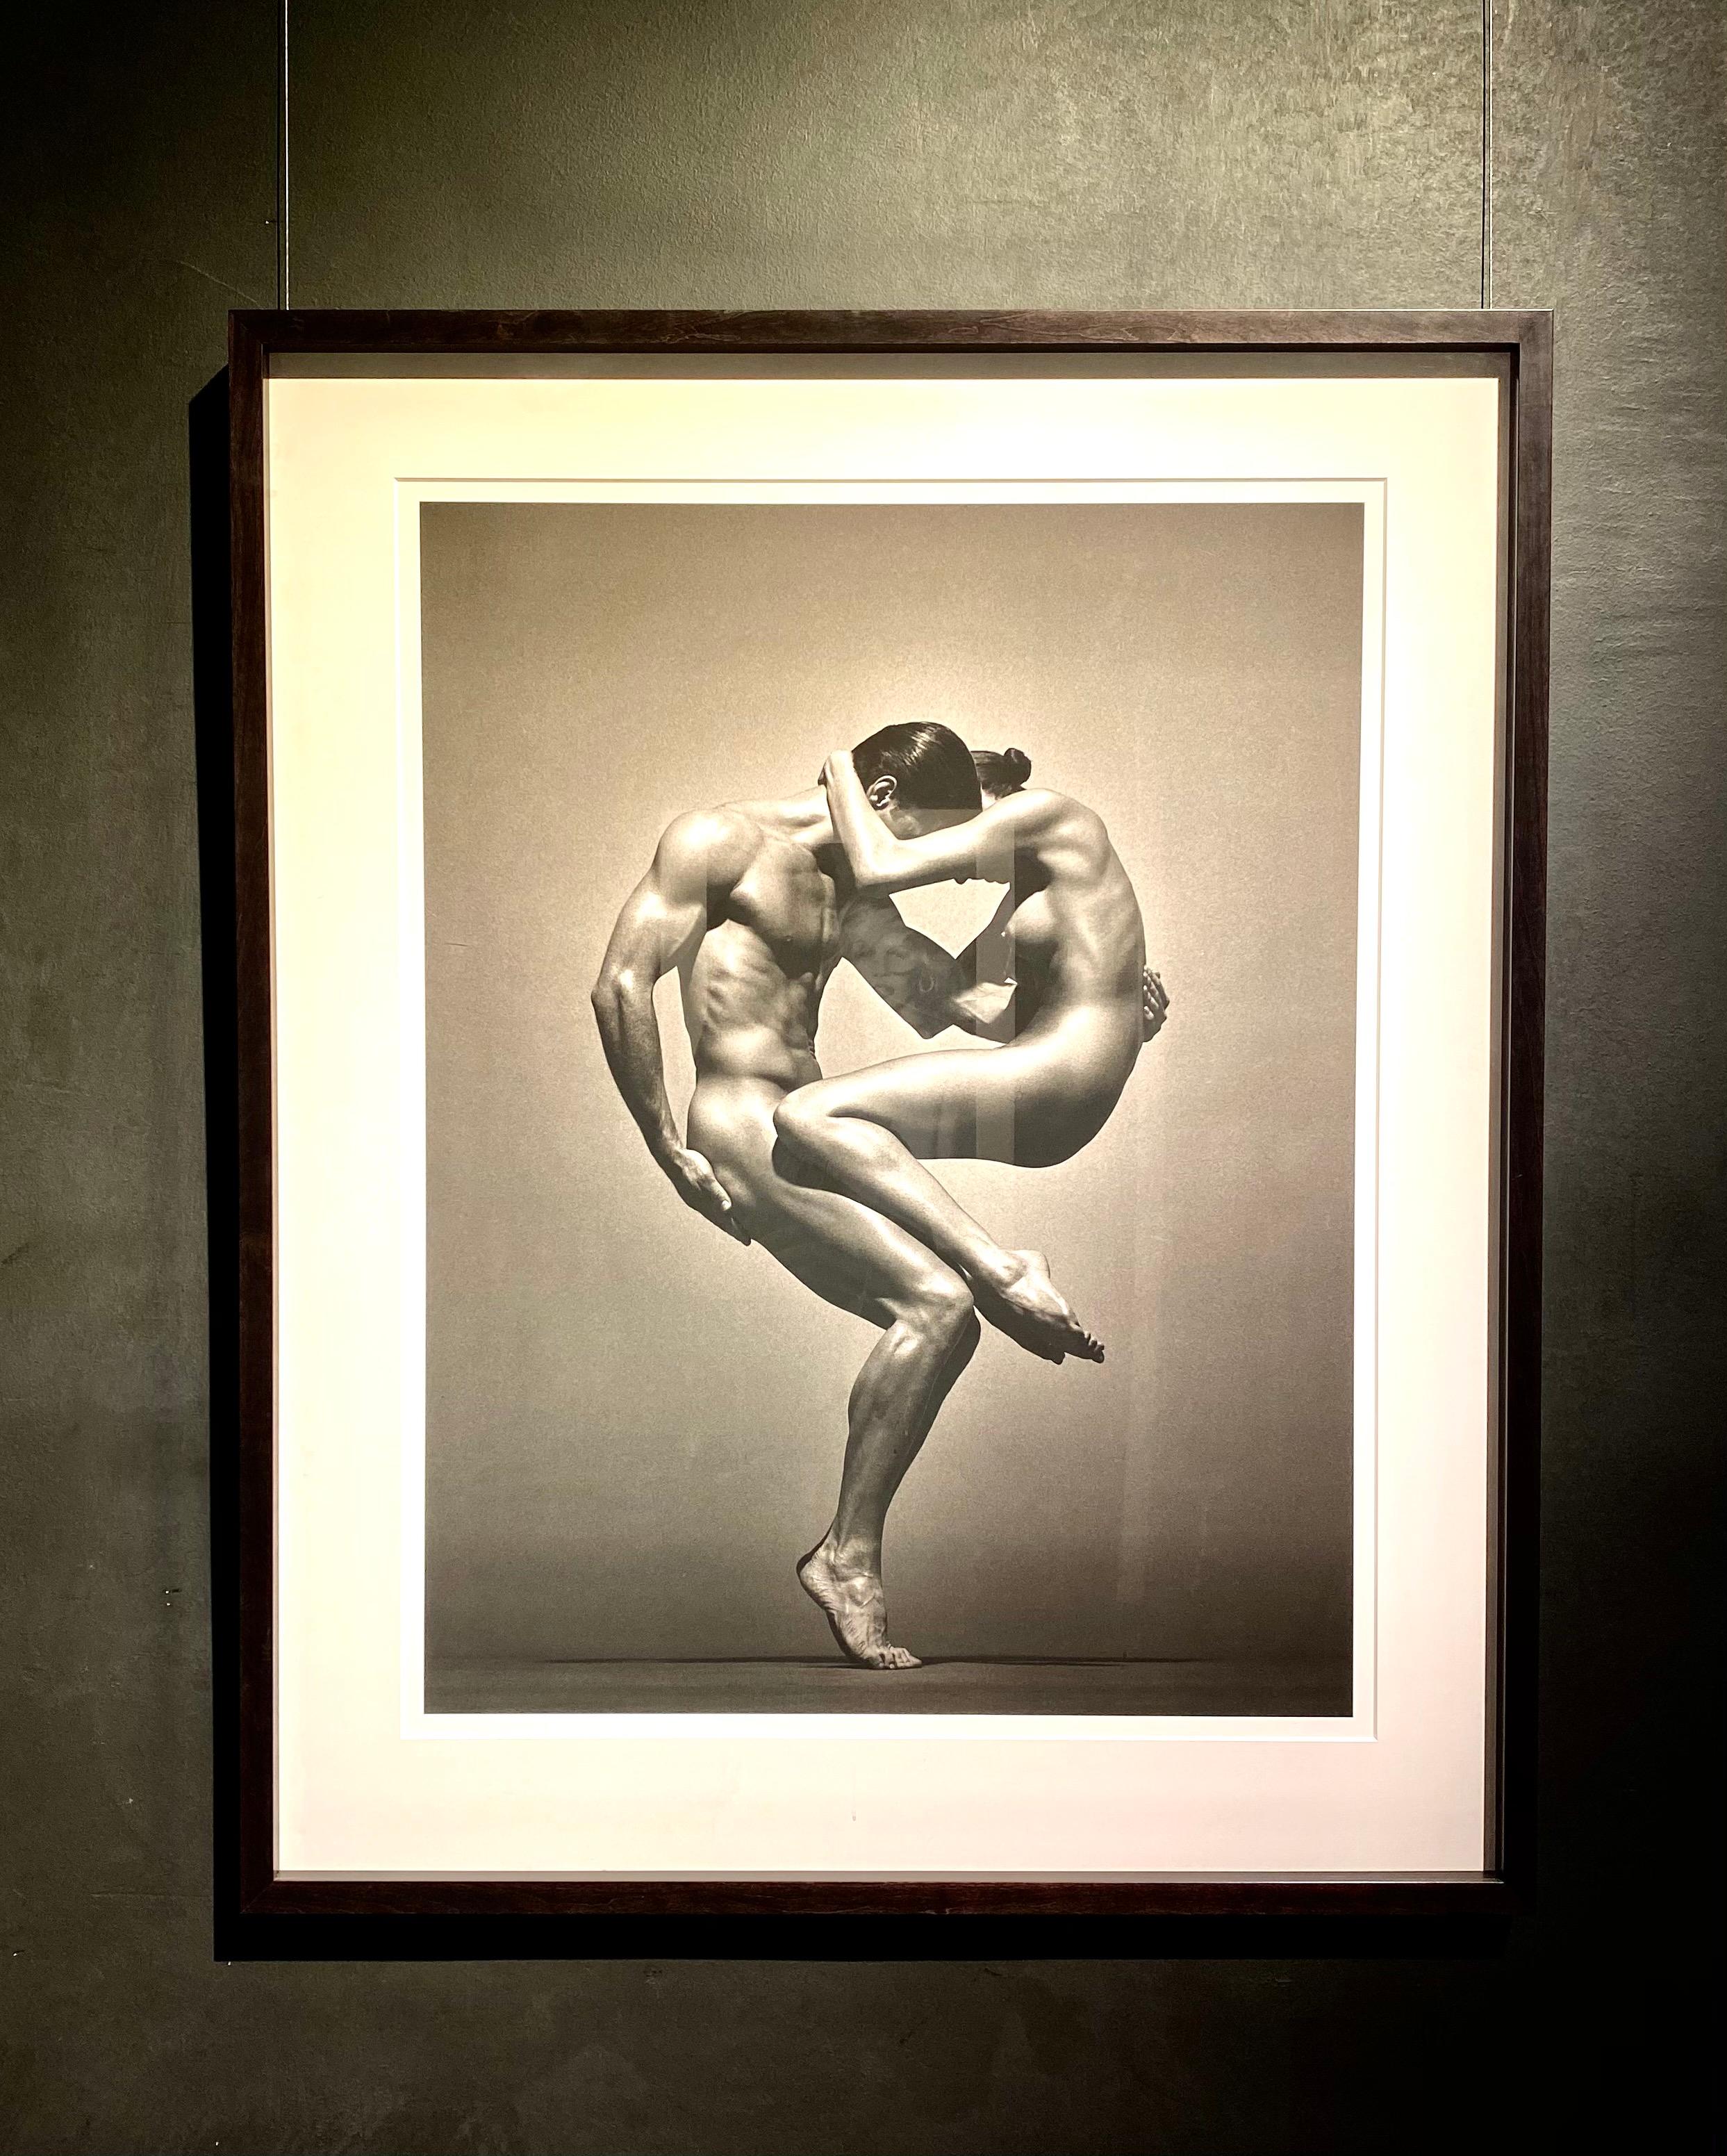 Sina&Anthony, Vienna - douple nude in athletic pose, fine art photography, 1995 - Photograph by Andreas H. Bitesnich